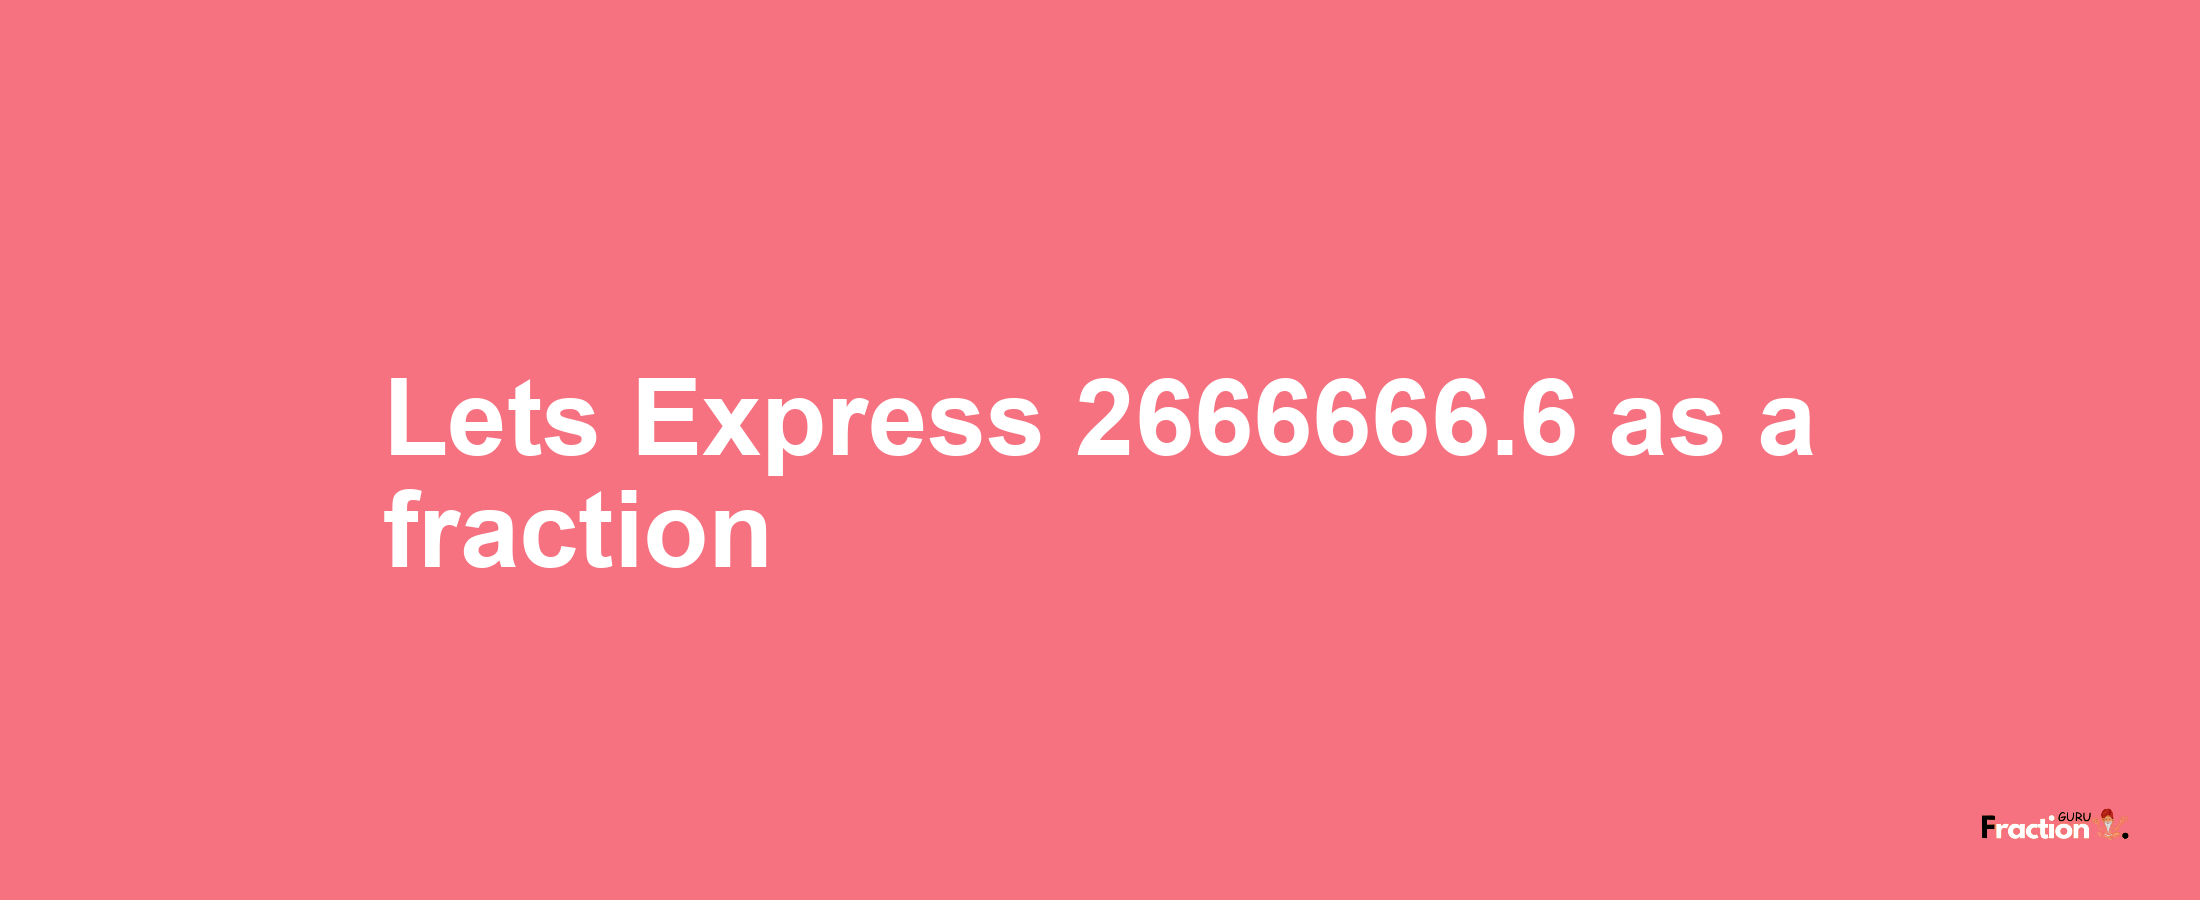 Lets Express 2666666.6 as afraction